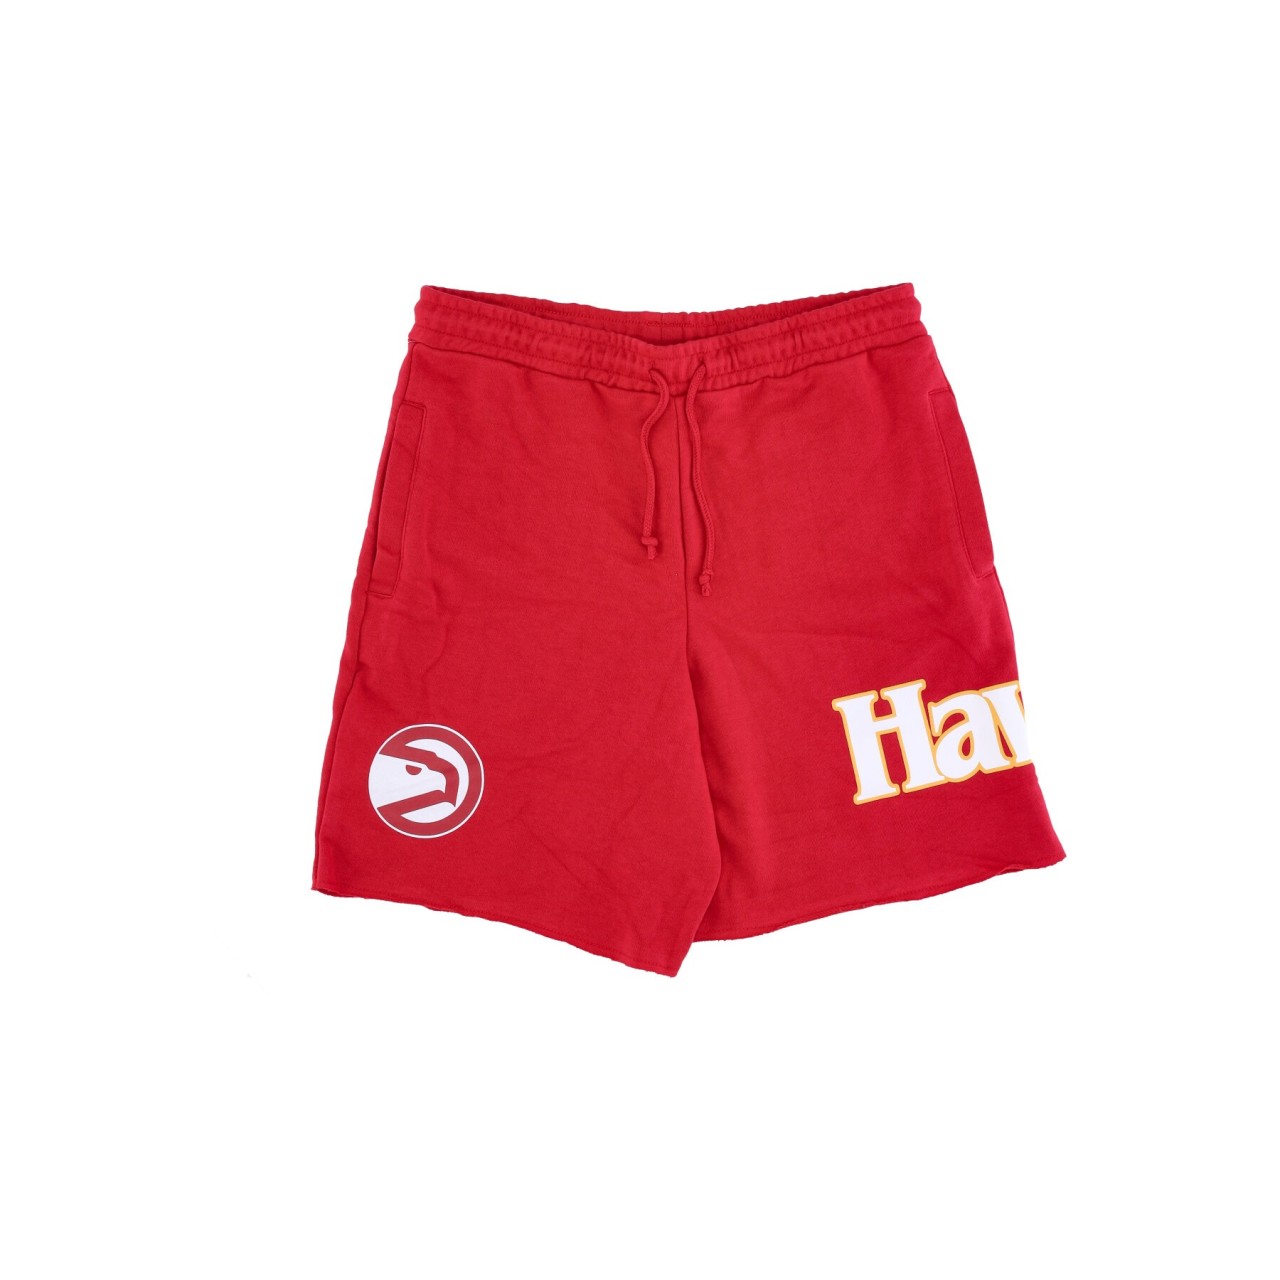 MITCHELL & NESS NBA GAME DAY FRENCH TERRY SHORT HARDWOOD CLASSICS ATLHAW SHORAJ19075-AHASCAR